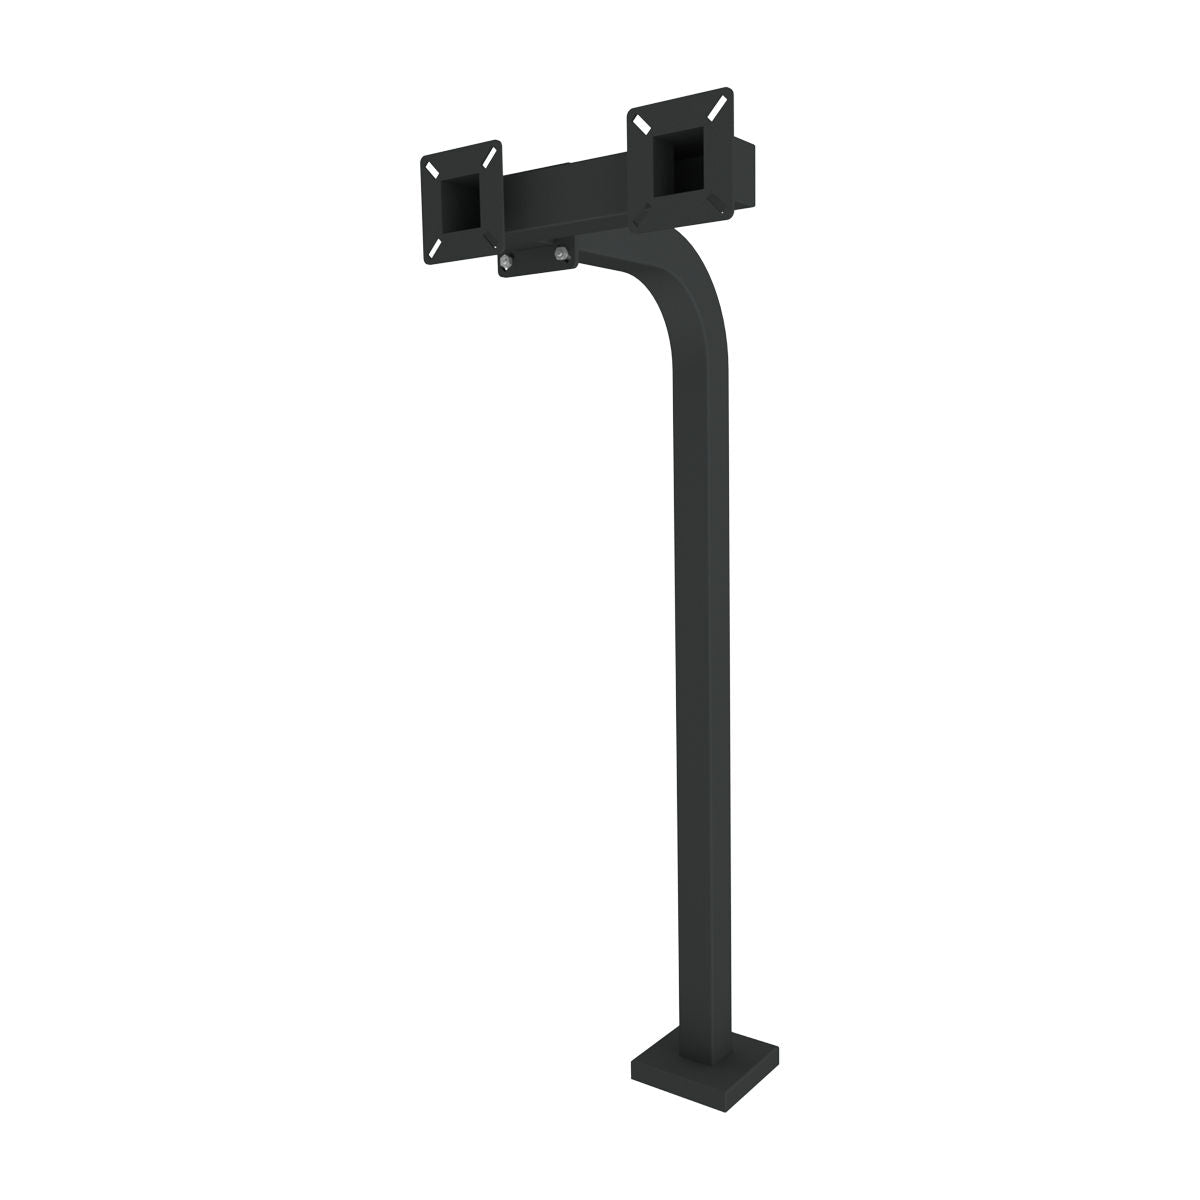 Security Brands 18-A01 shown on a gooseneck post